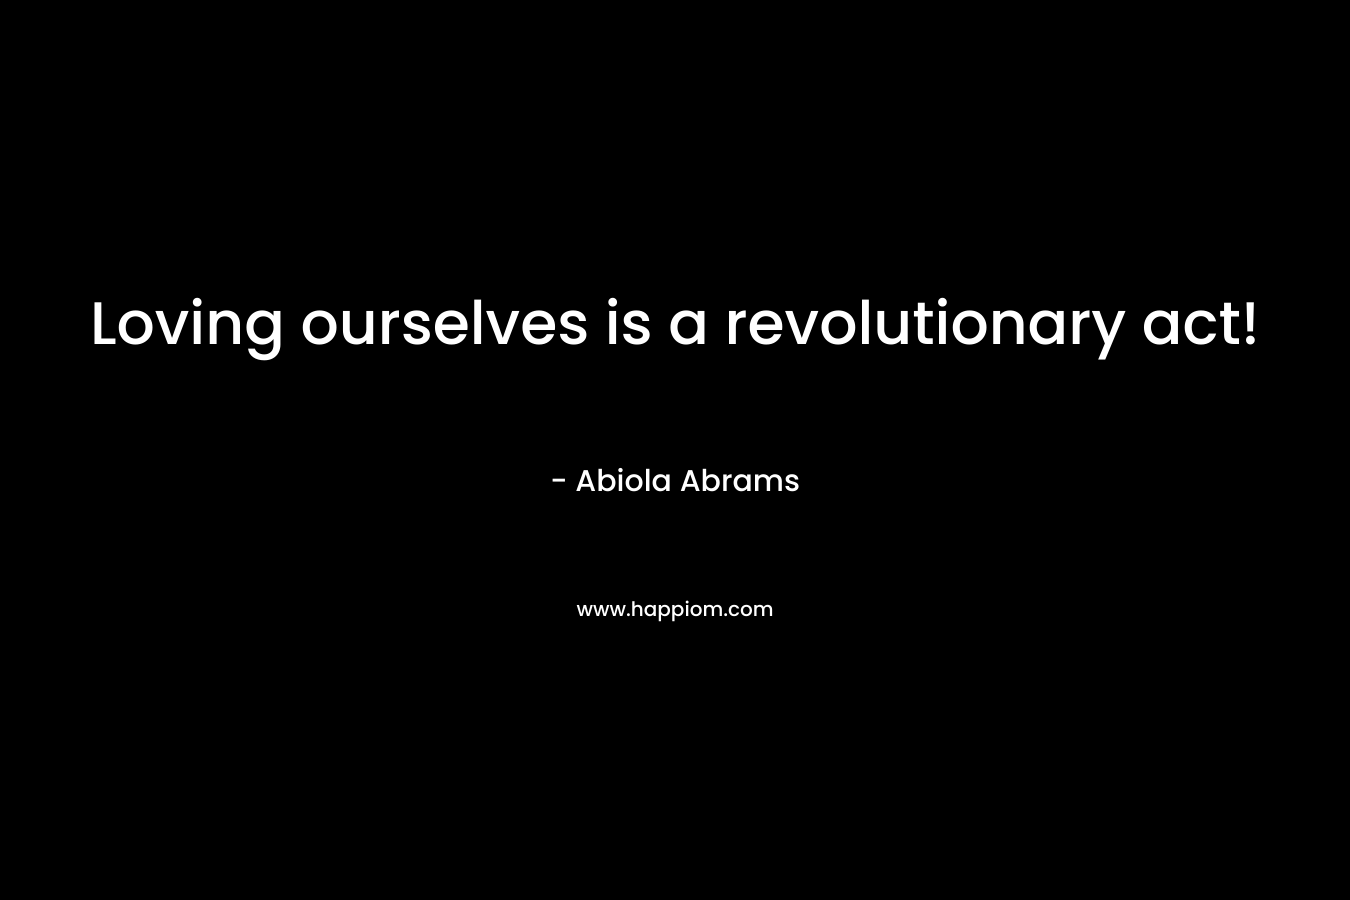 Loving ourselves is a revolutionary act! – Abiola Abrams